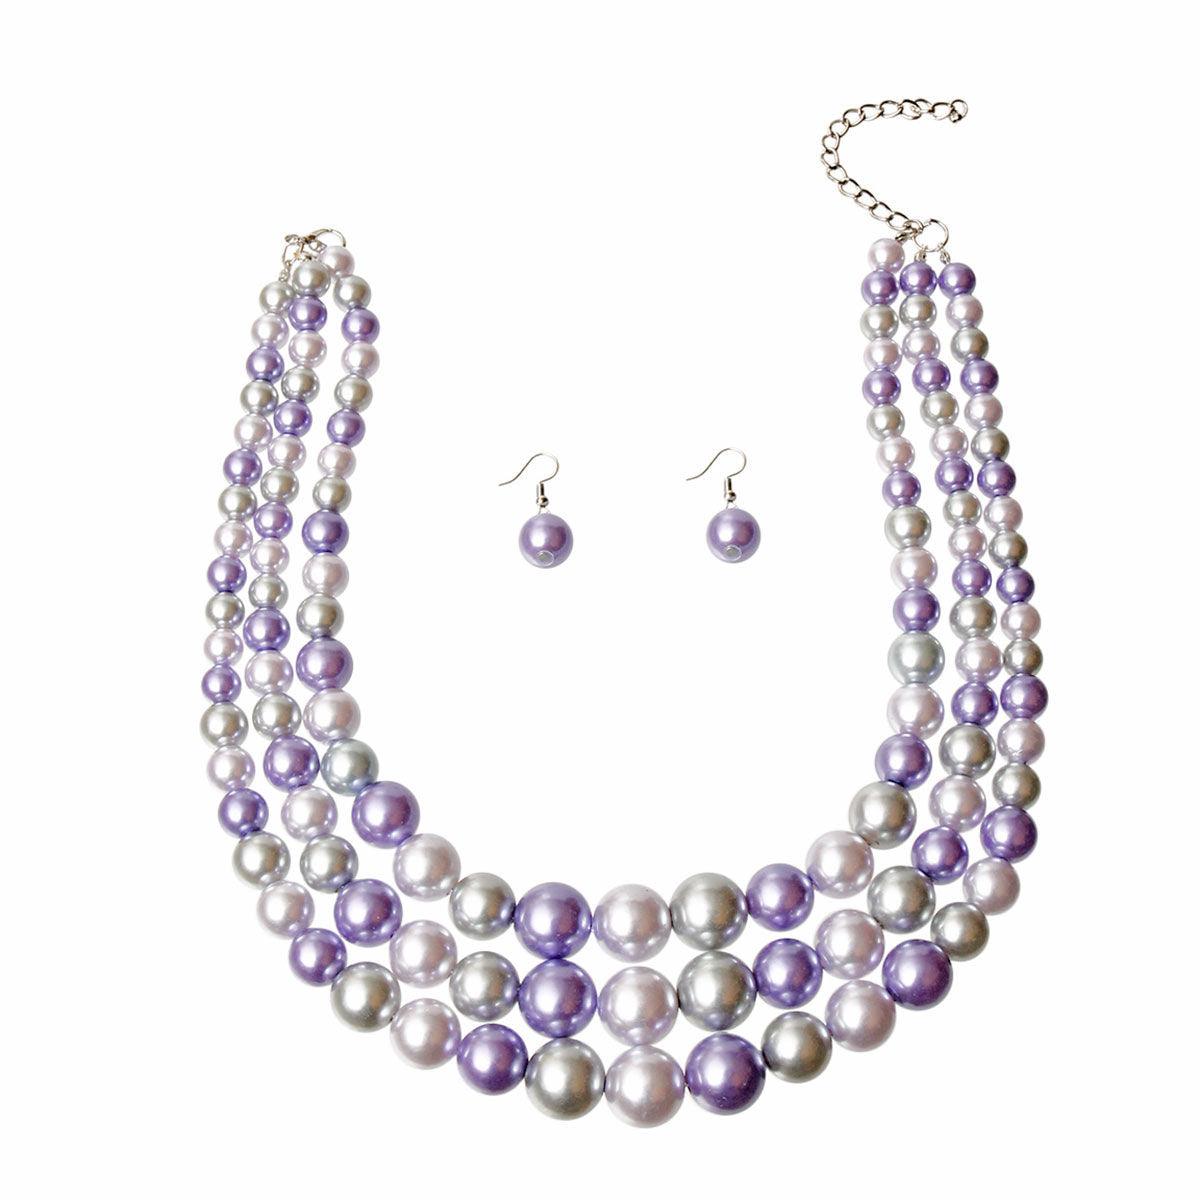 Make a Statement: Smokey Pearl 3 Layer Necklace Set for Every Occasion